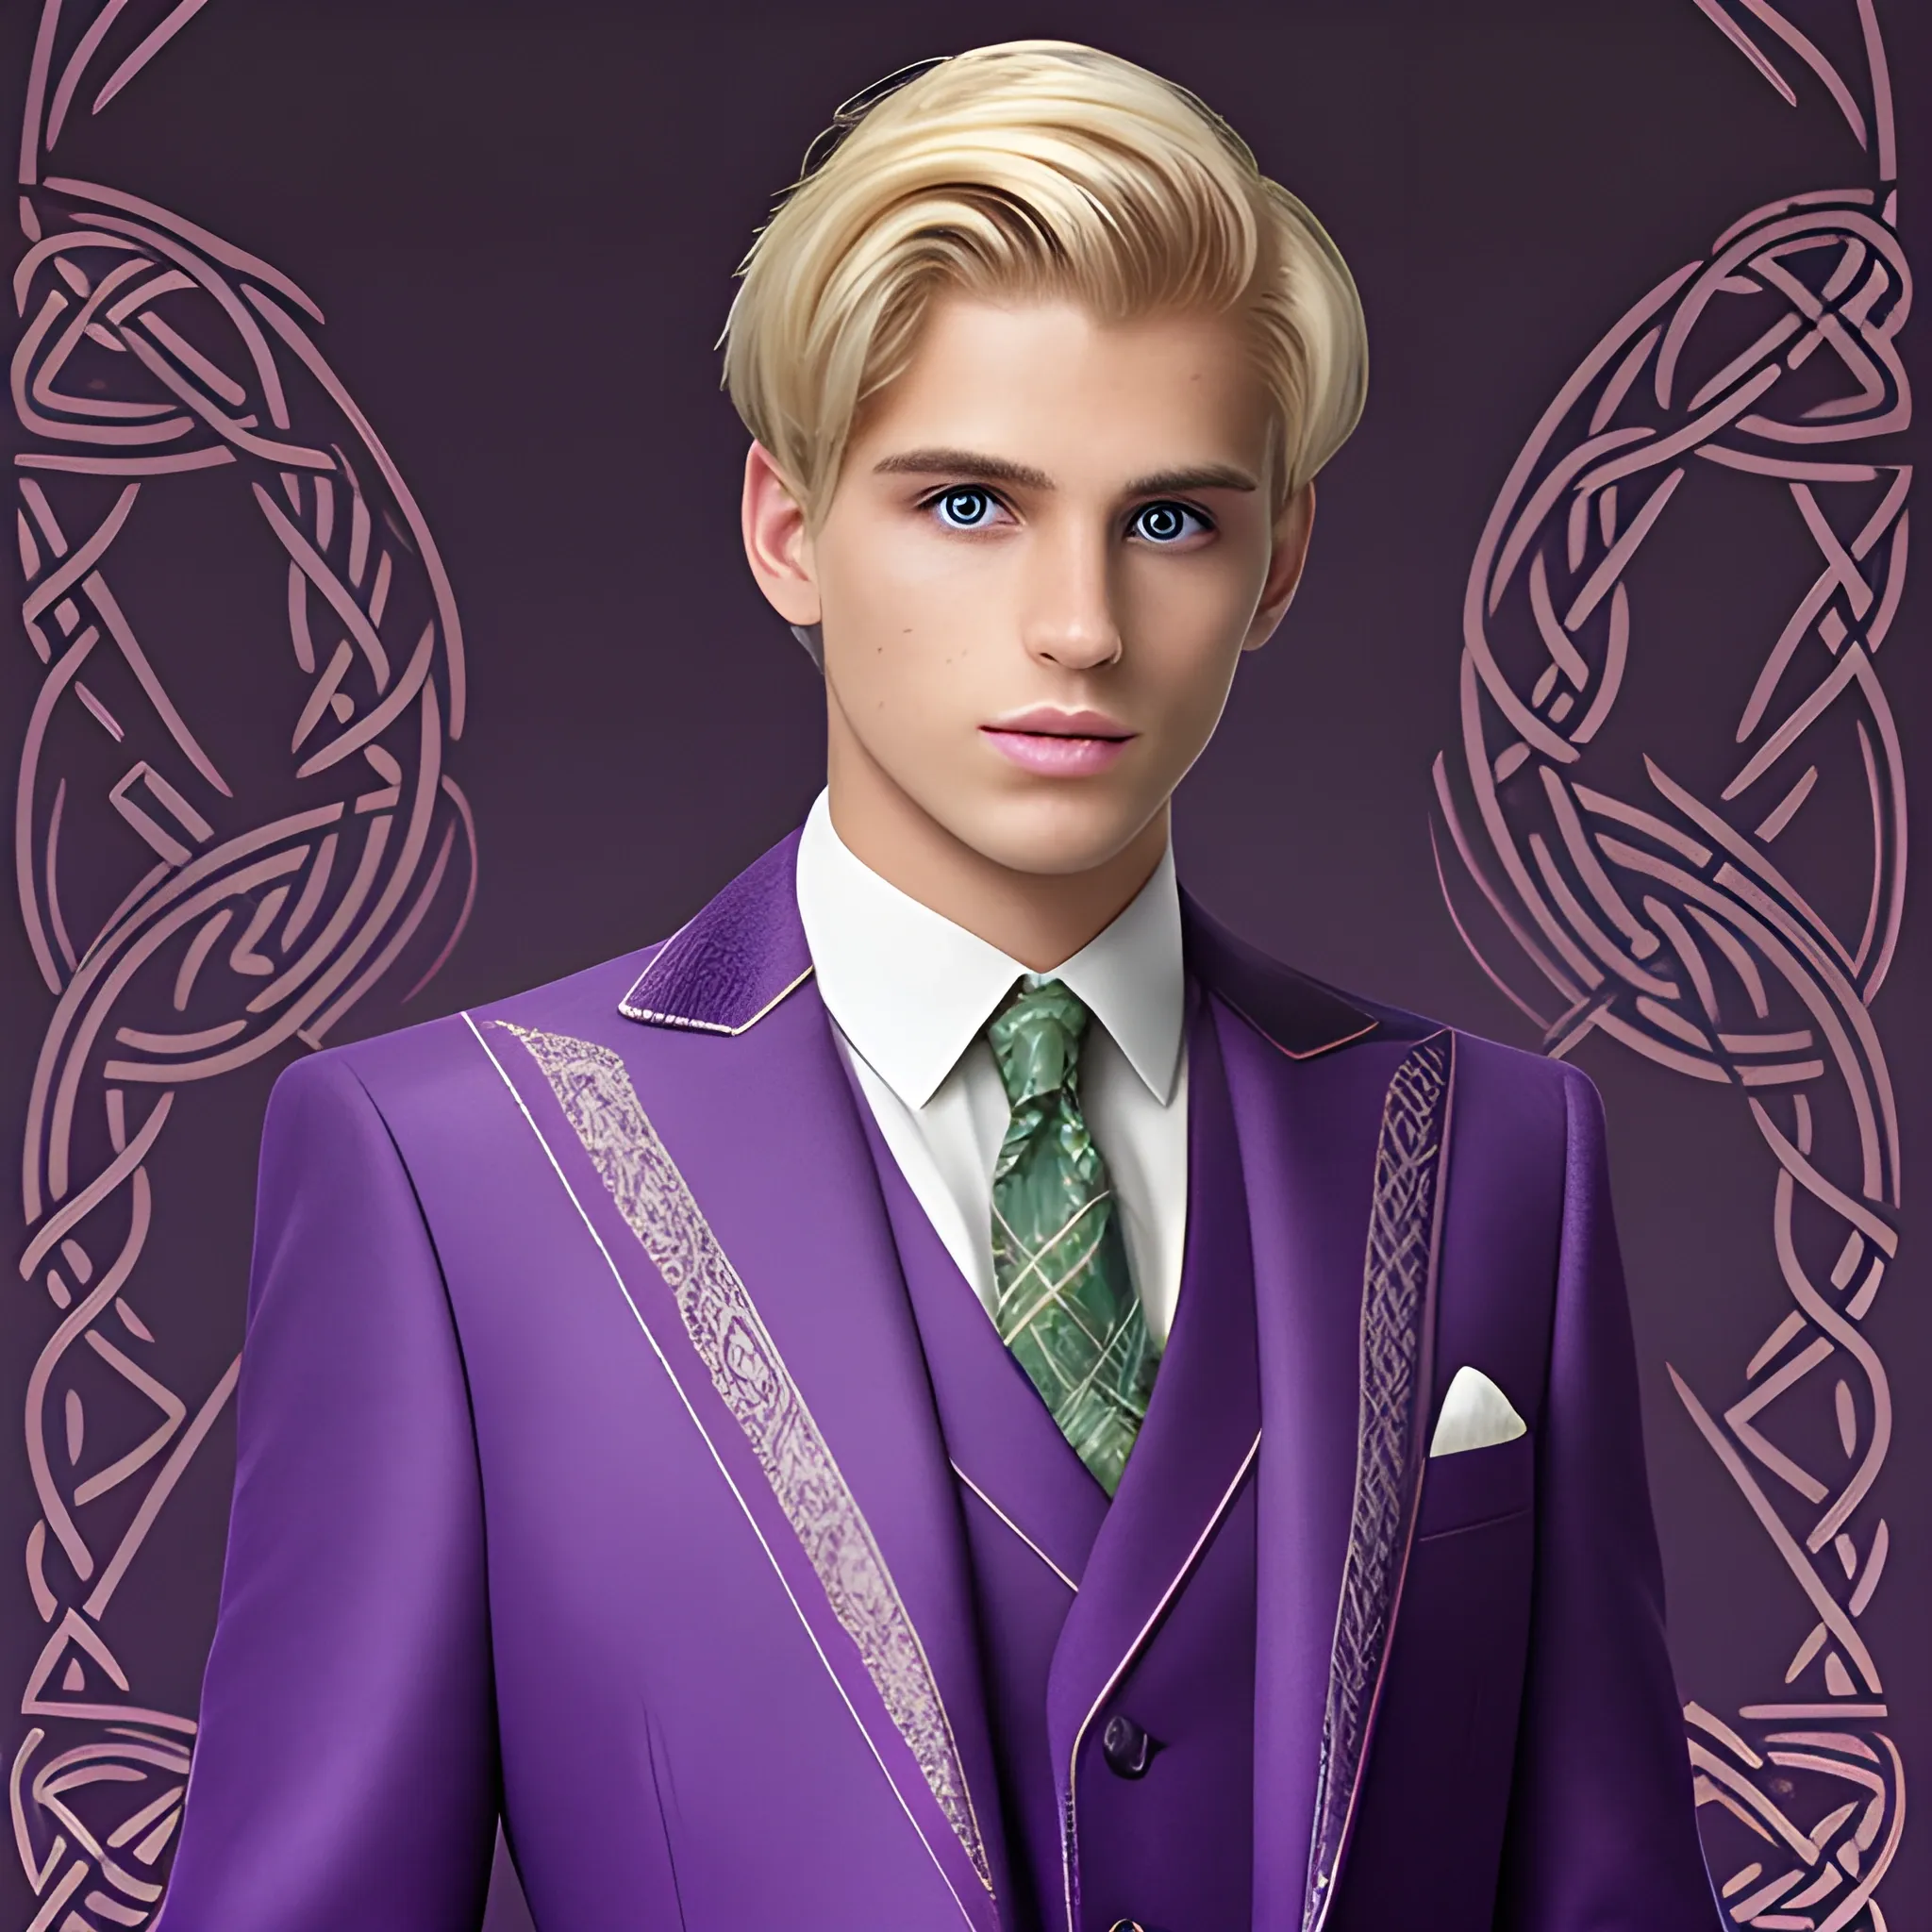 Short male with blond hair styled with a middle part, tanned skin. He is looking at the camera wearing a purple suit. 
Attached to the suit is a cloak which has a Celtic pattern on it.
Fantasy